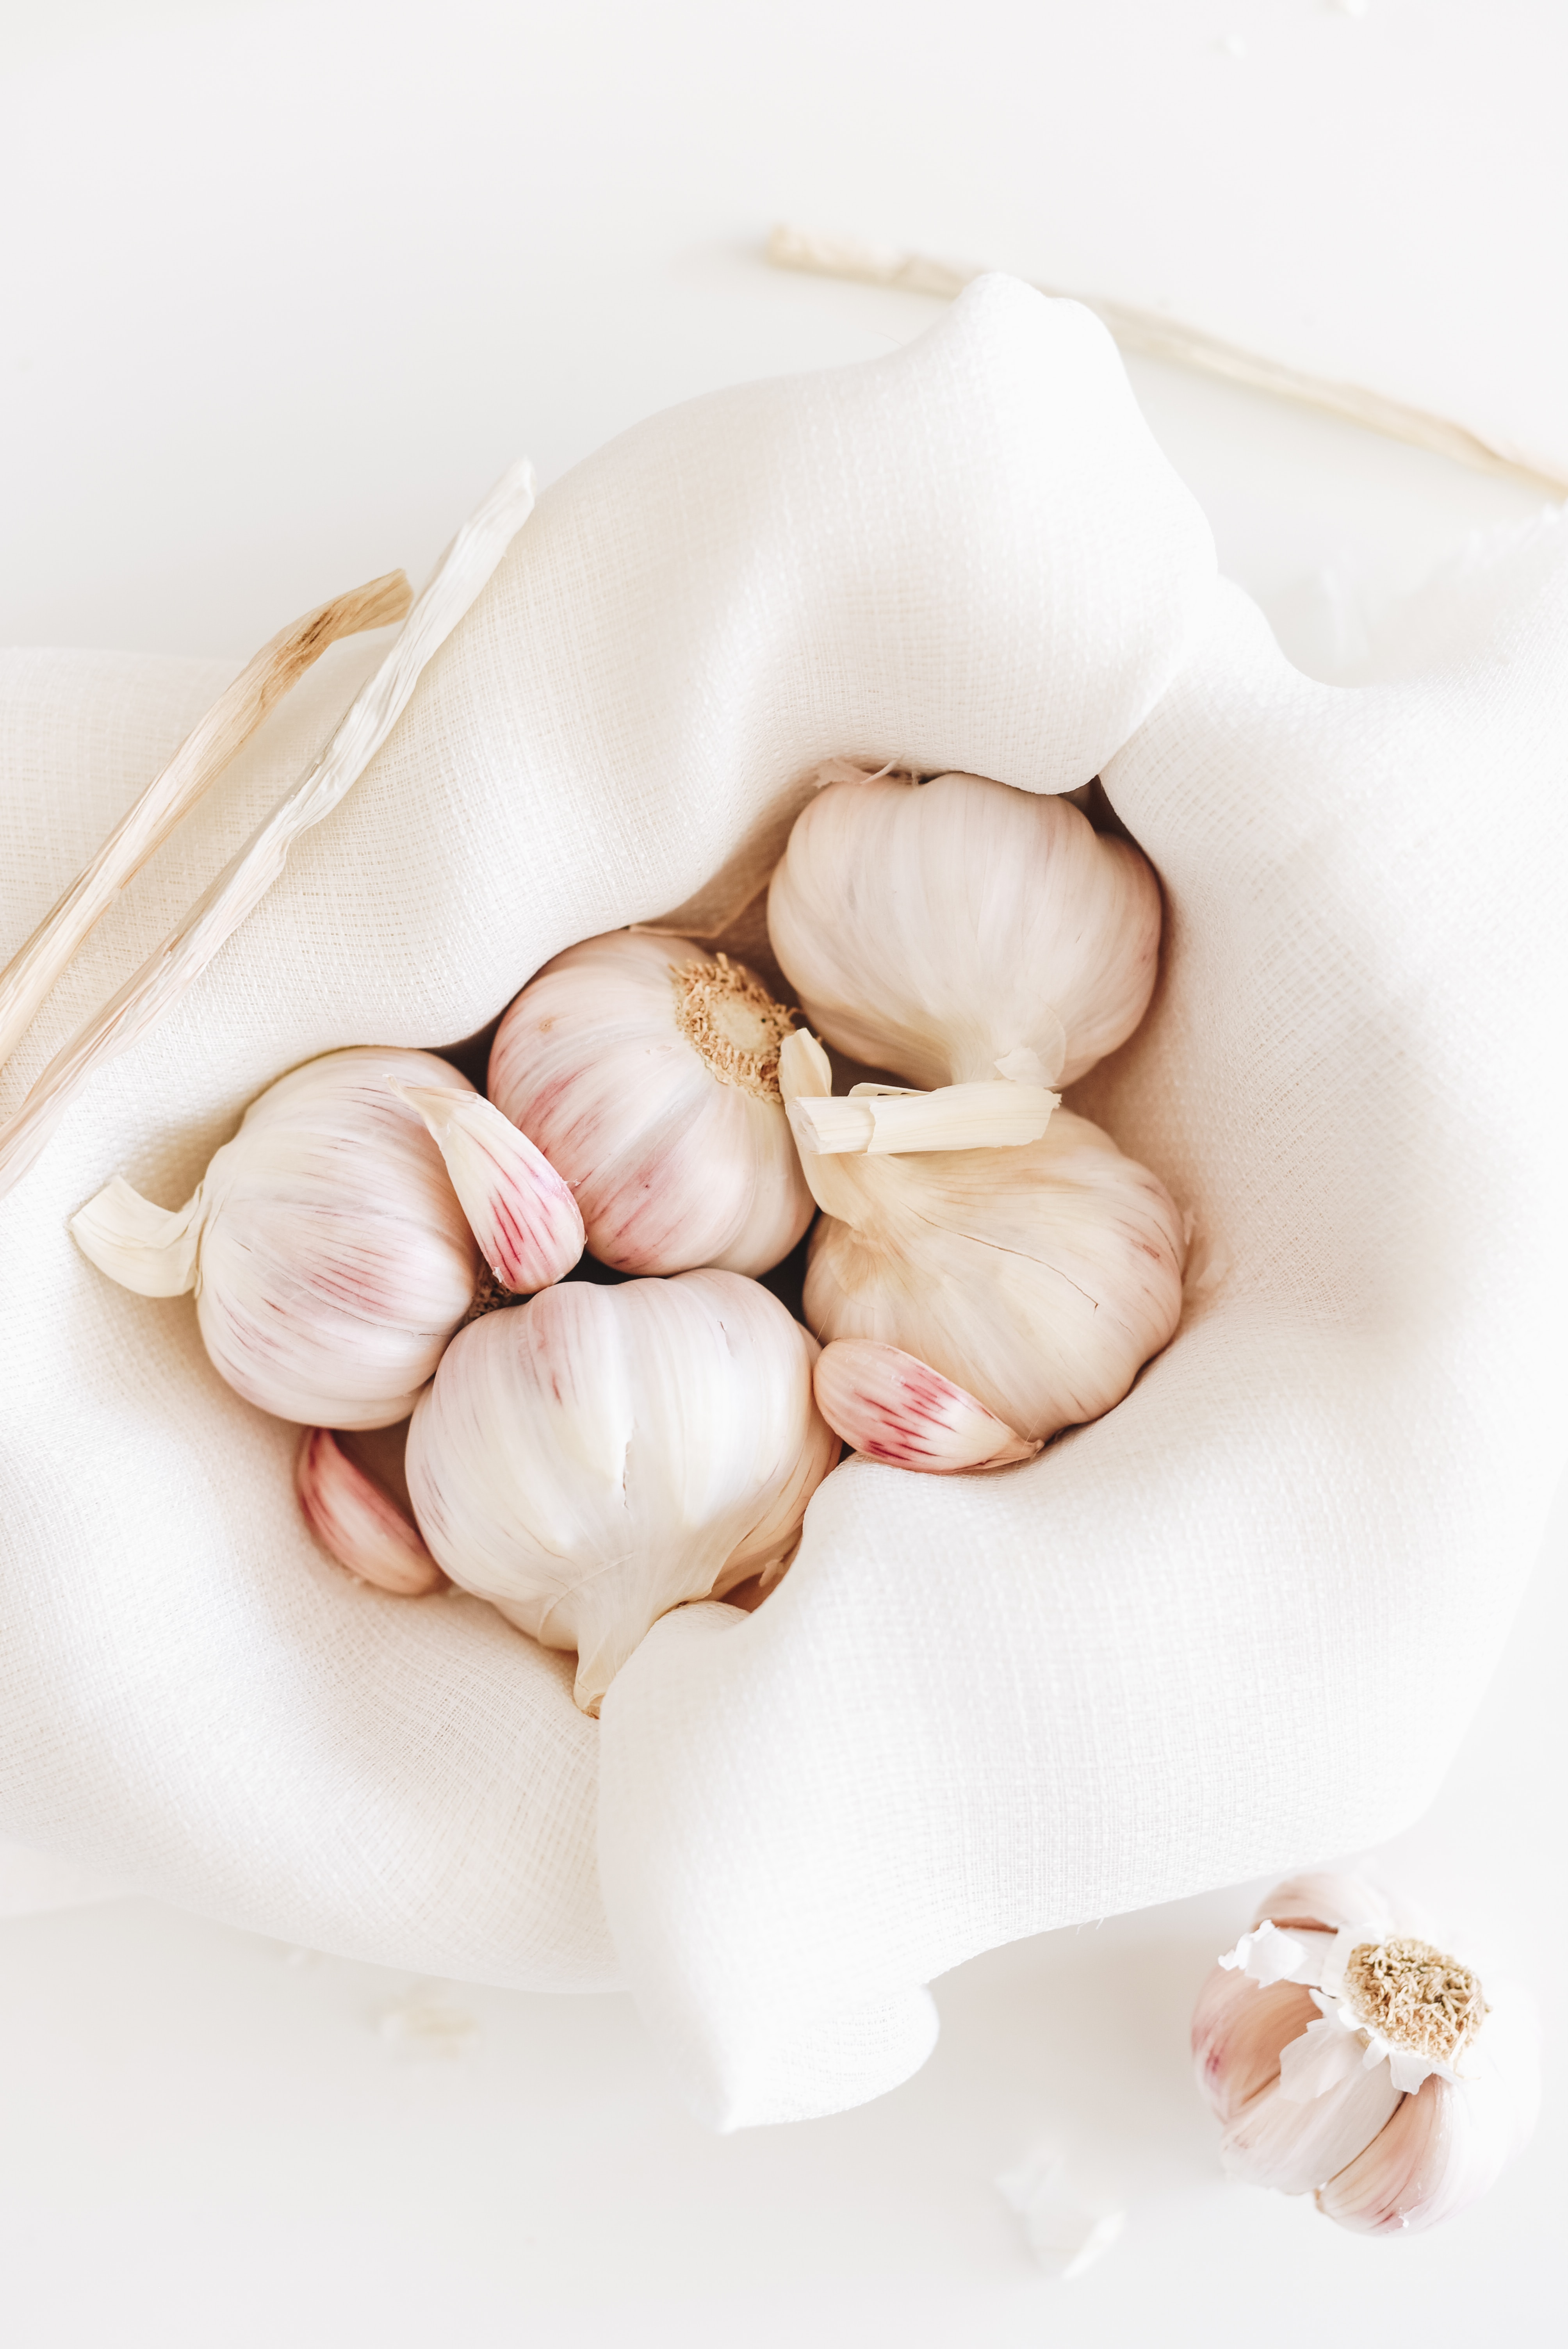 3 Factors That Influence The Price of Garlic In The U.S.